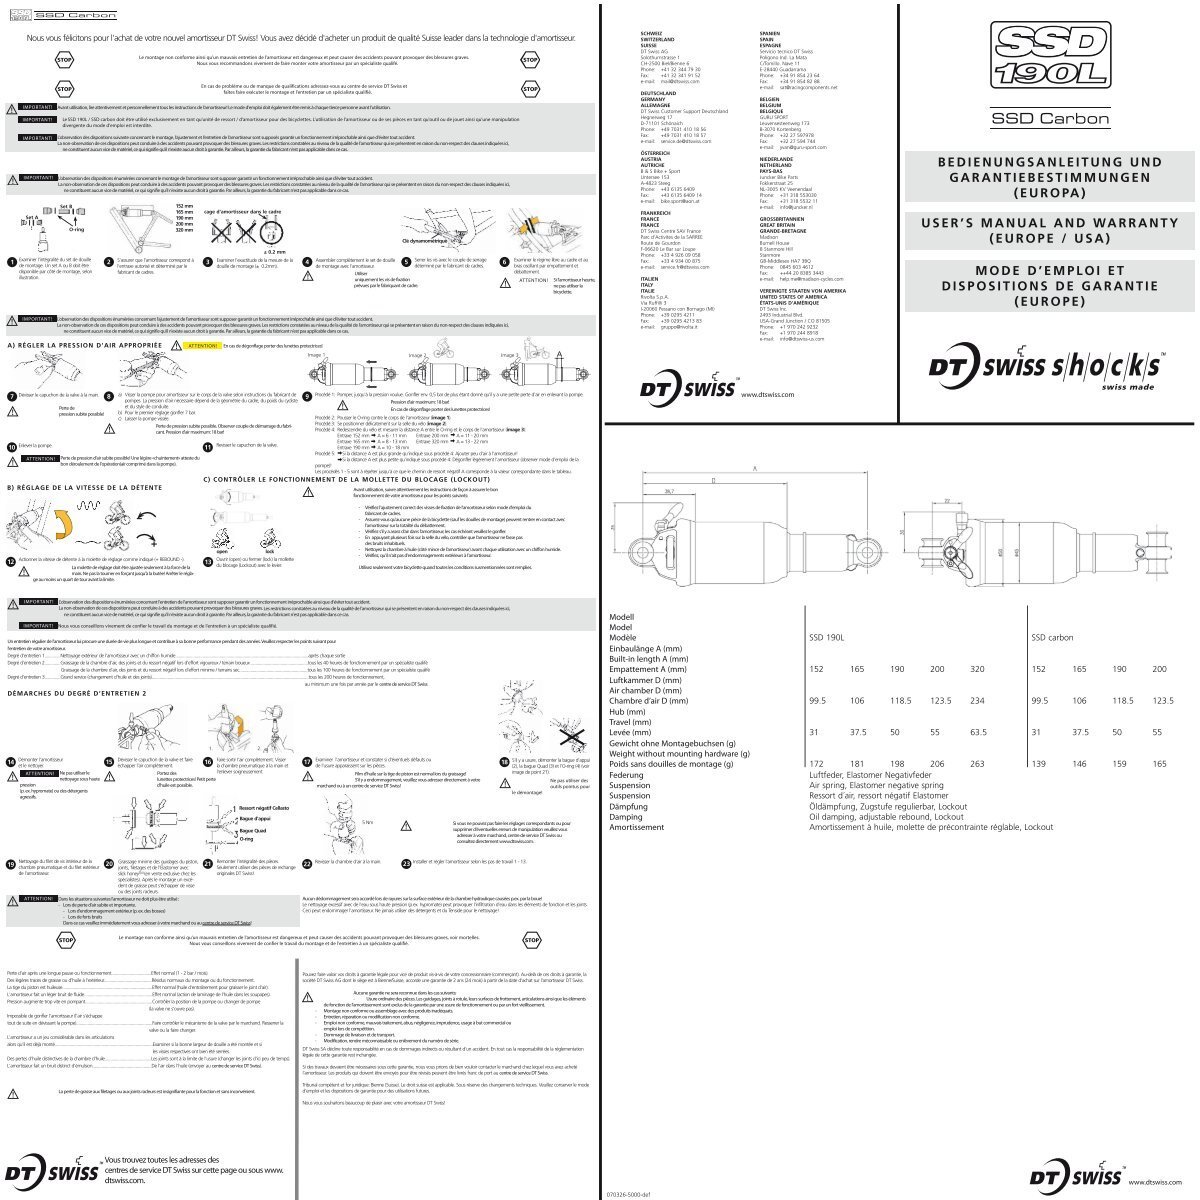 europa) user's manual and warranty (europe / usa) - DT Swiss